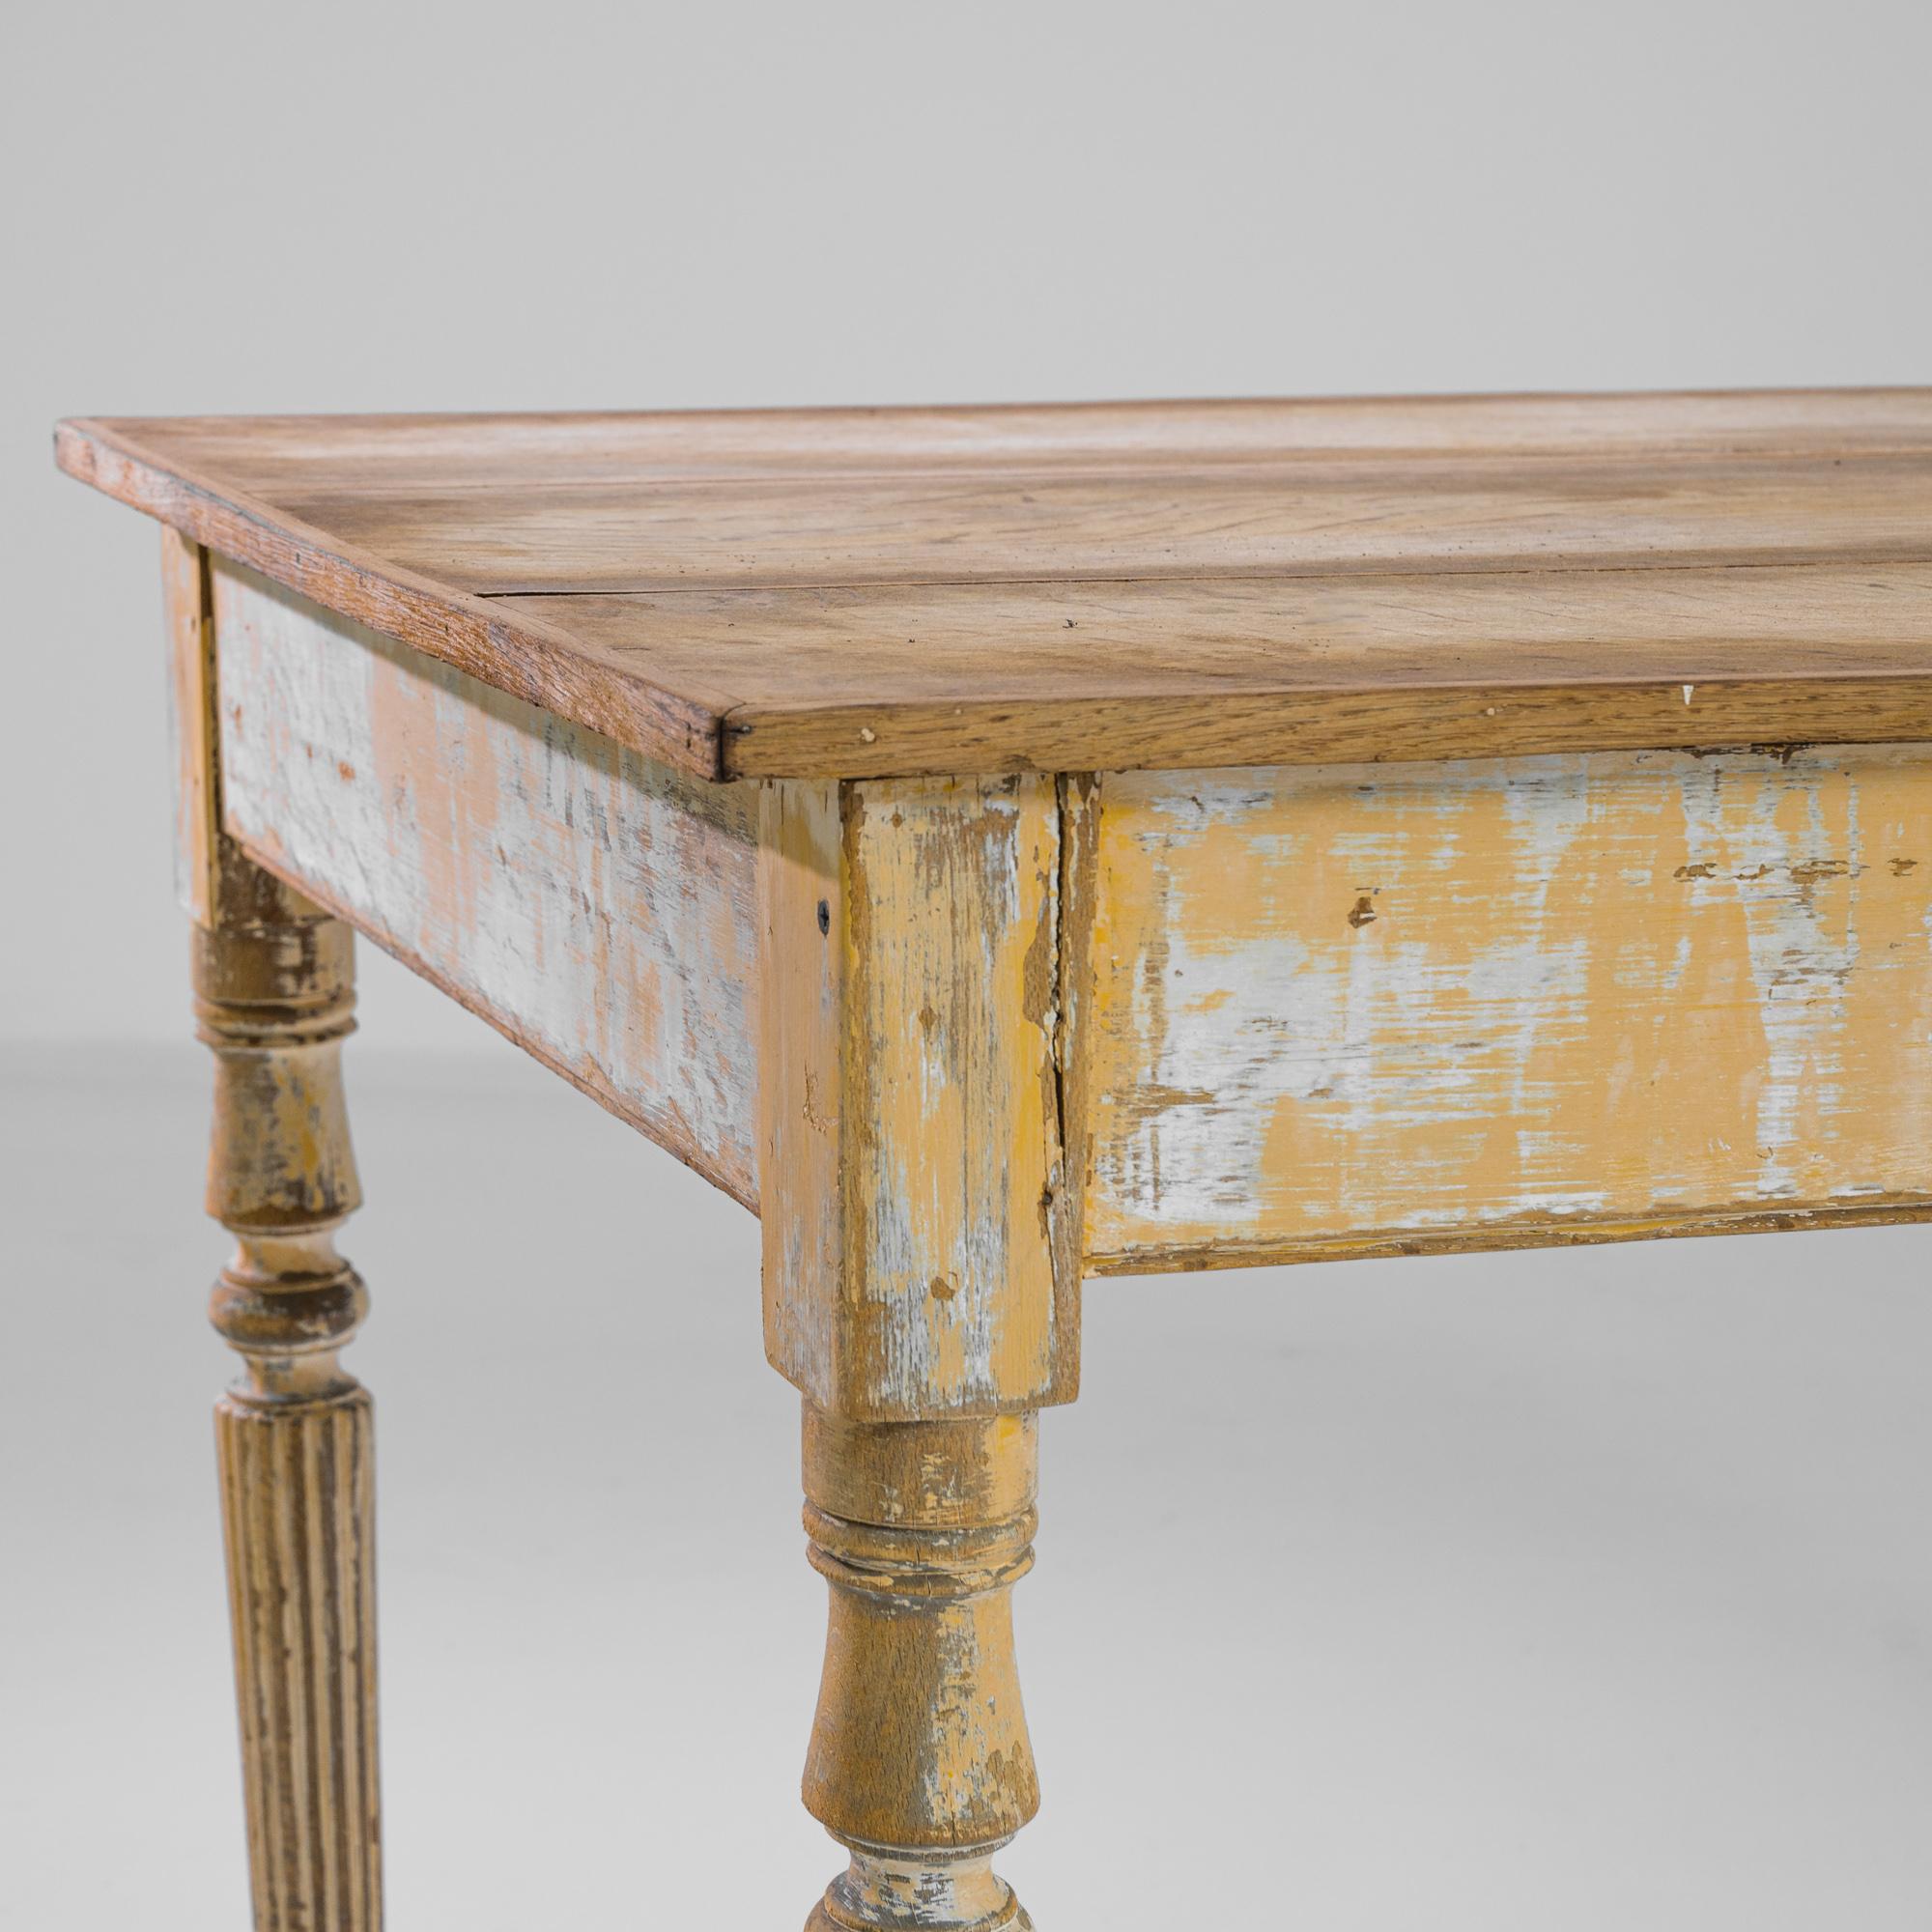 A wood patinated table from France, produced circa 1900. An antique occasional table with original yellow patination, featuring a sliding side drawer with engraved floral motif metal pull. Stood on four elegant banister style legs and stretching